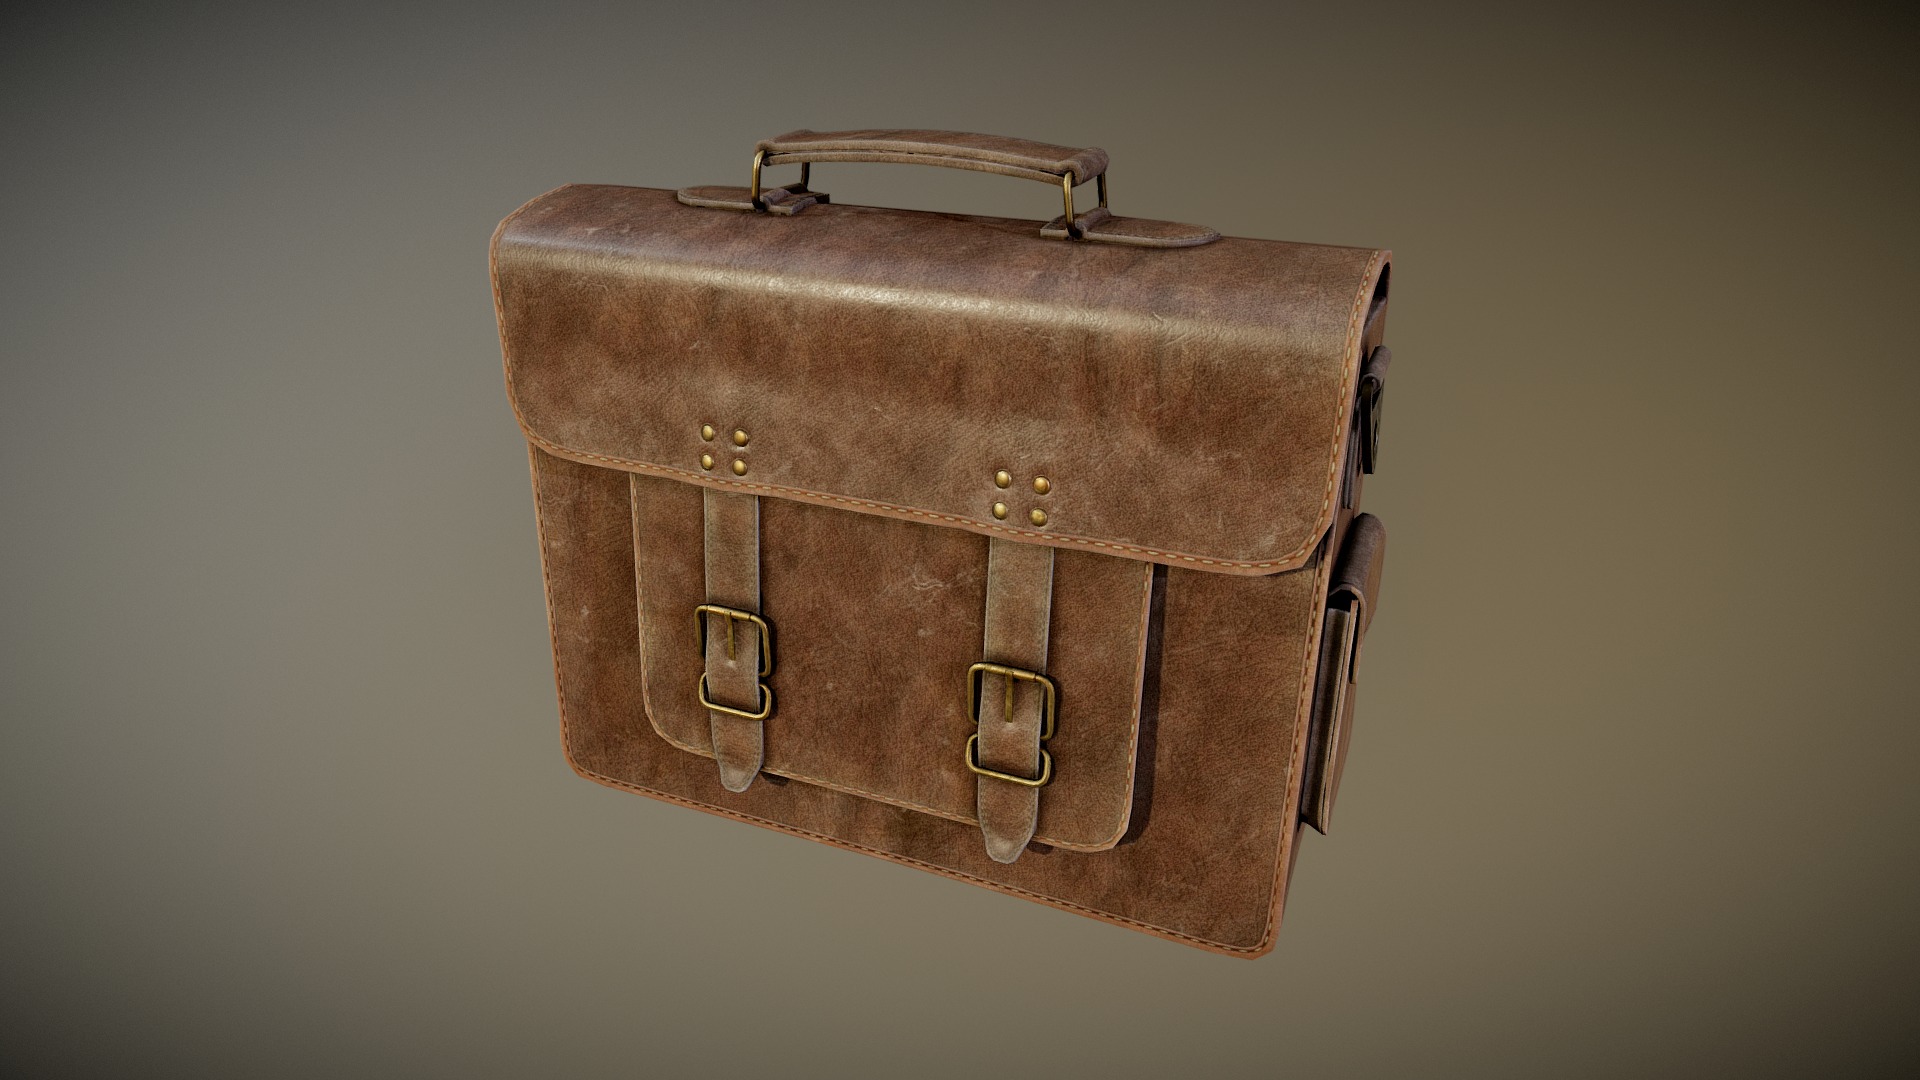 3D model Leather Bag - This is a 3D model of the Leather Bag. The 3D model is about a brown leather handbag.